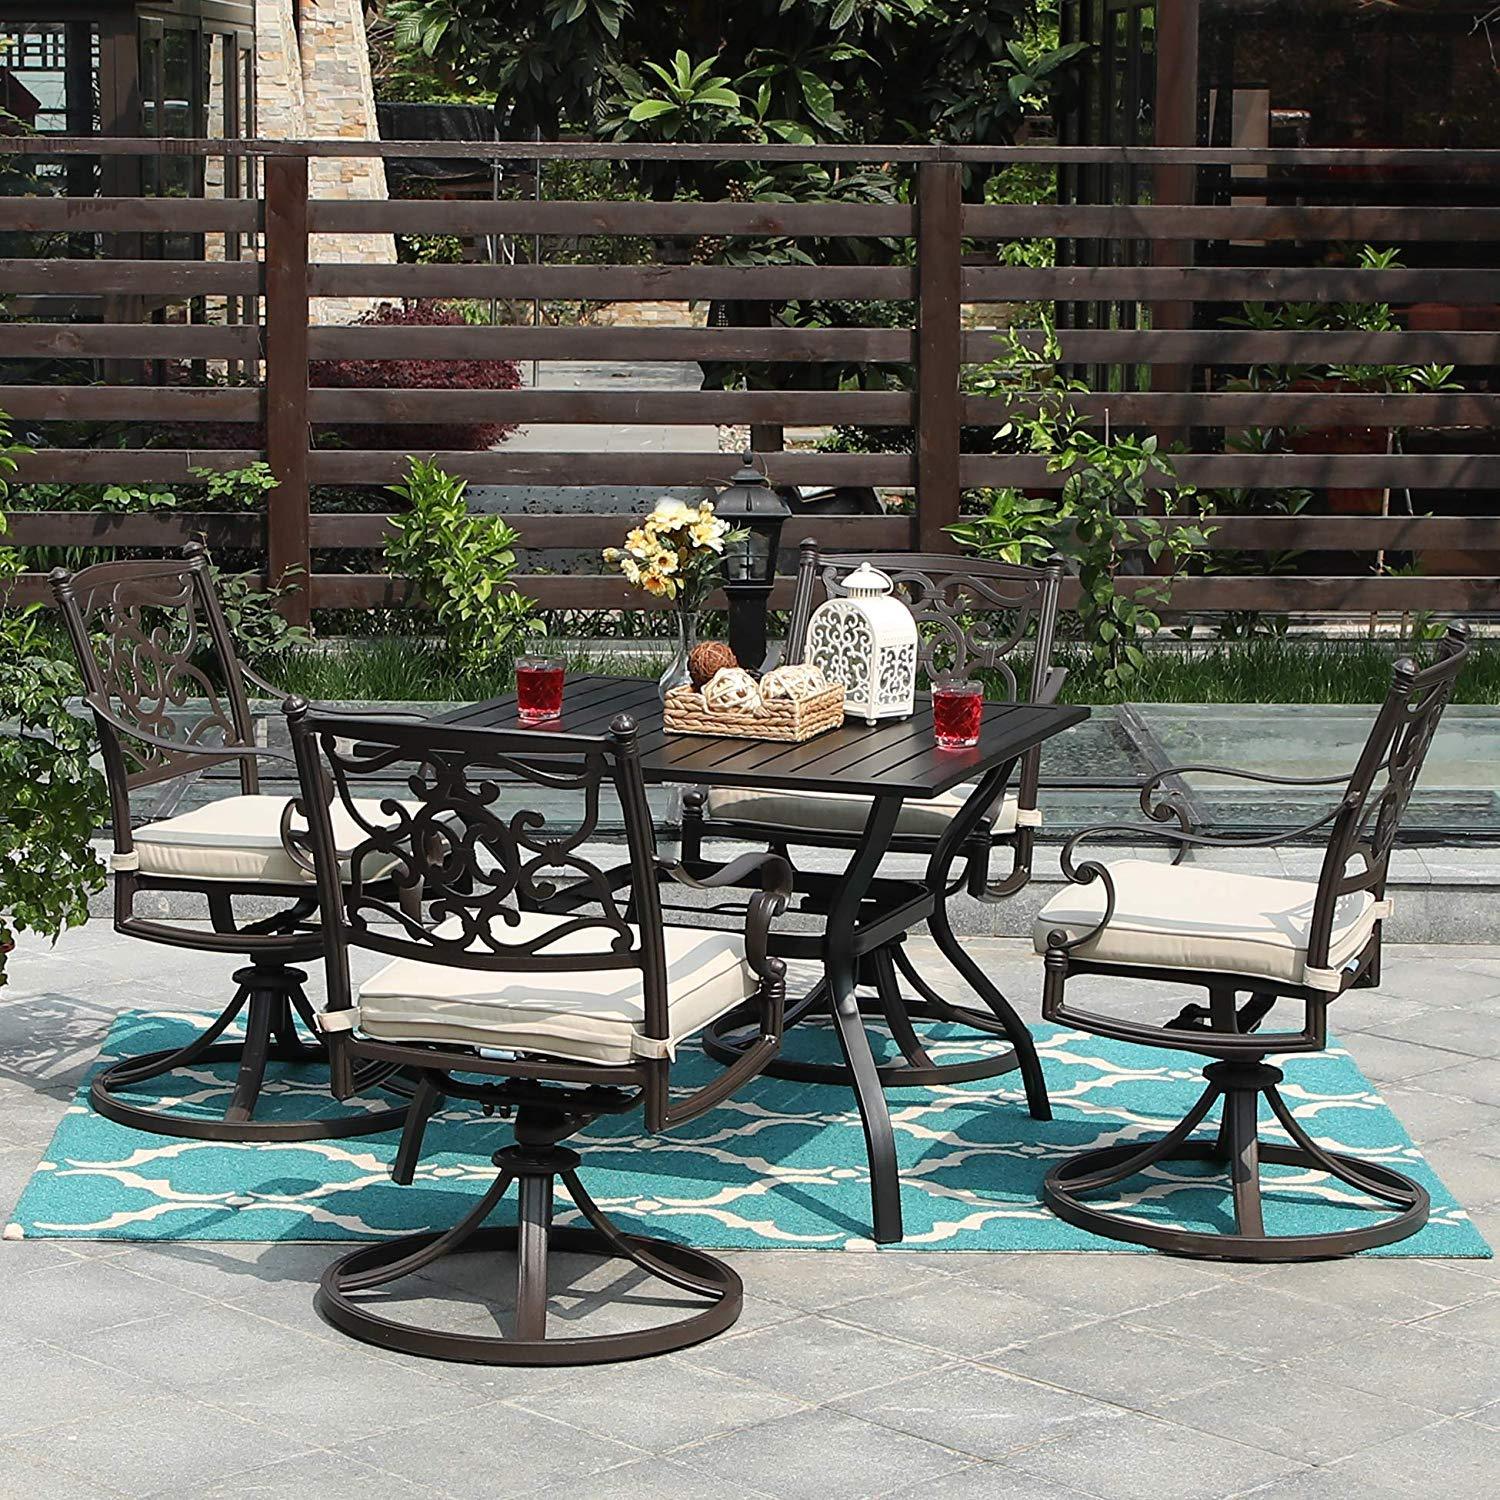 MFSTUDIO Cast Aluminum 5-Piece Patio Dining Set - 37" Metal Dining Table and Extra Wide Chairs